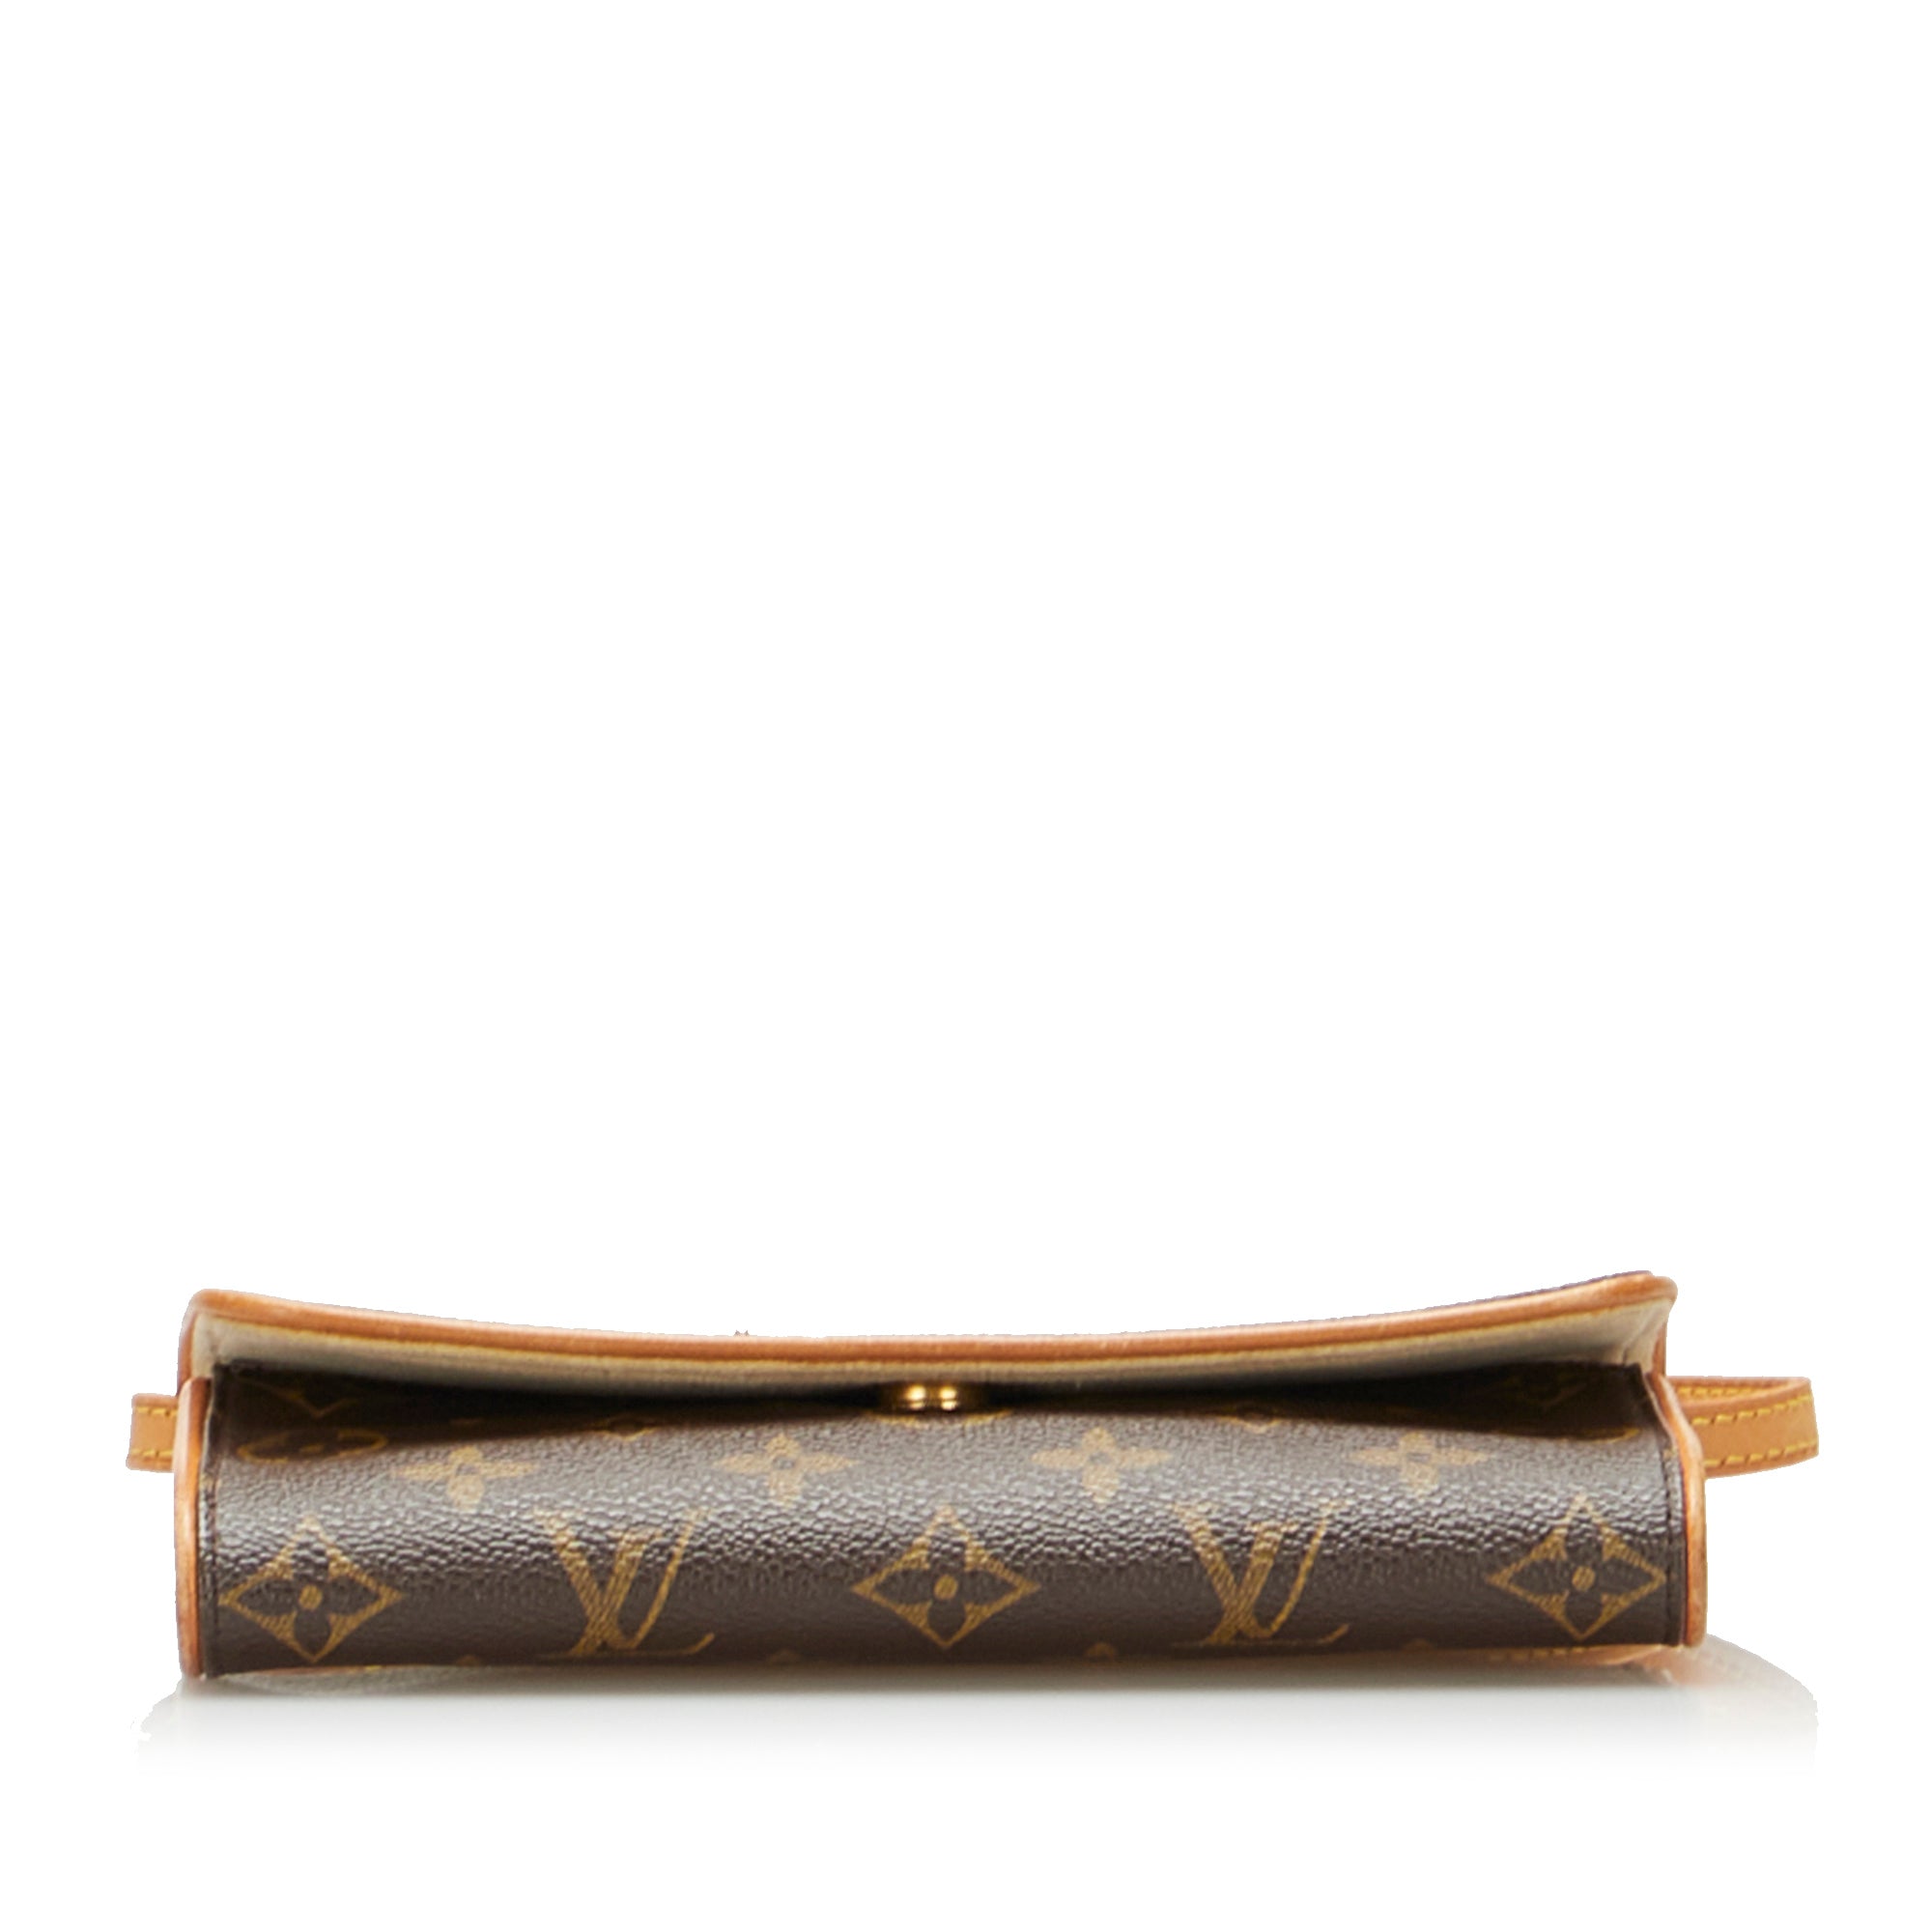 Be-Loved Bags - LOUIS VUITTON Monogram Pochette Twin PM